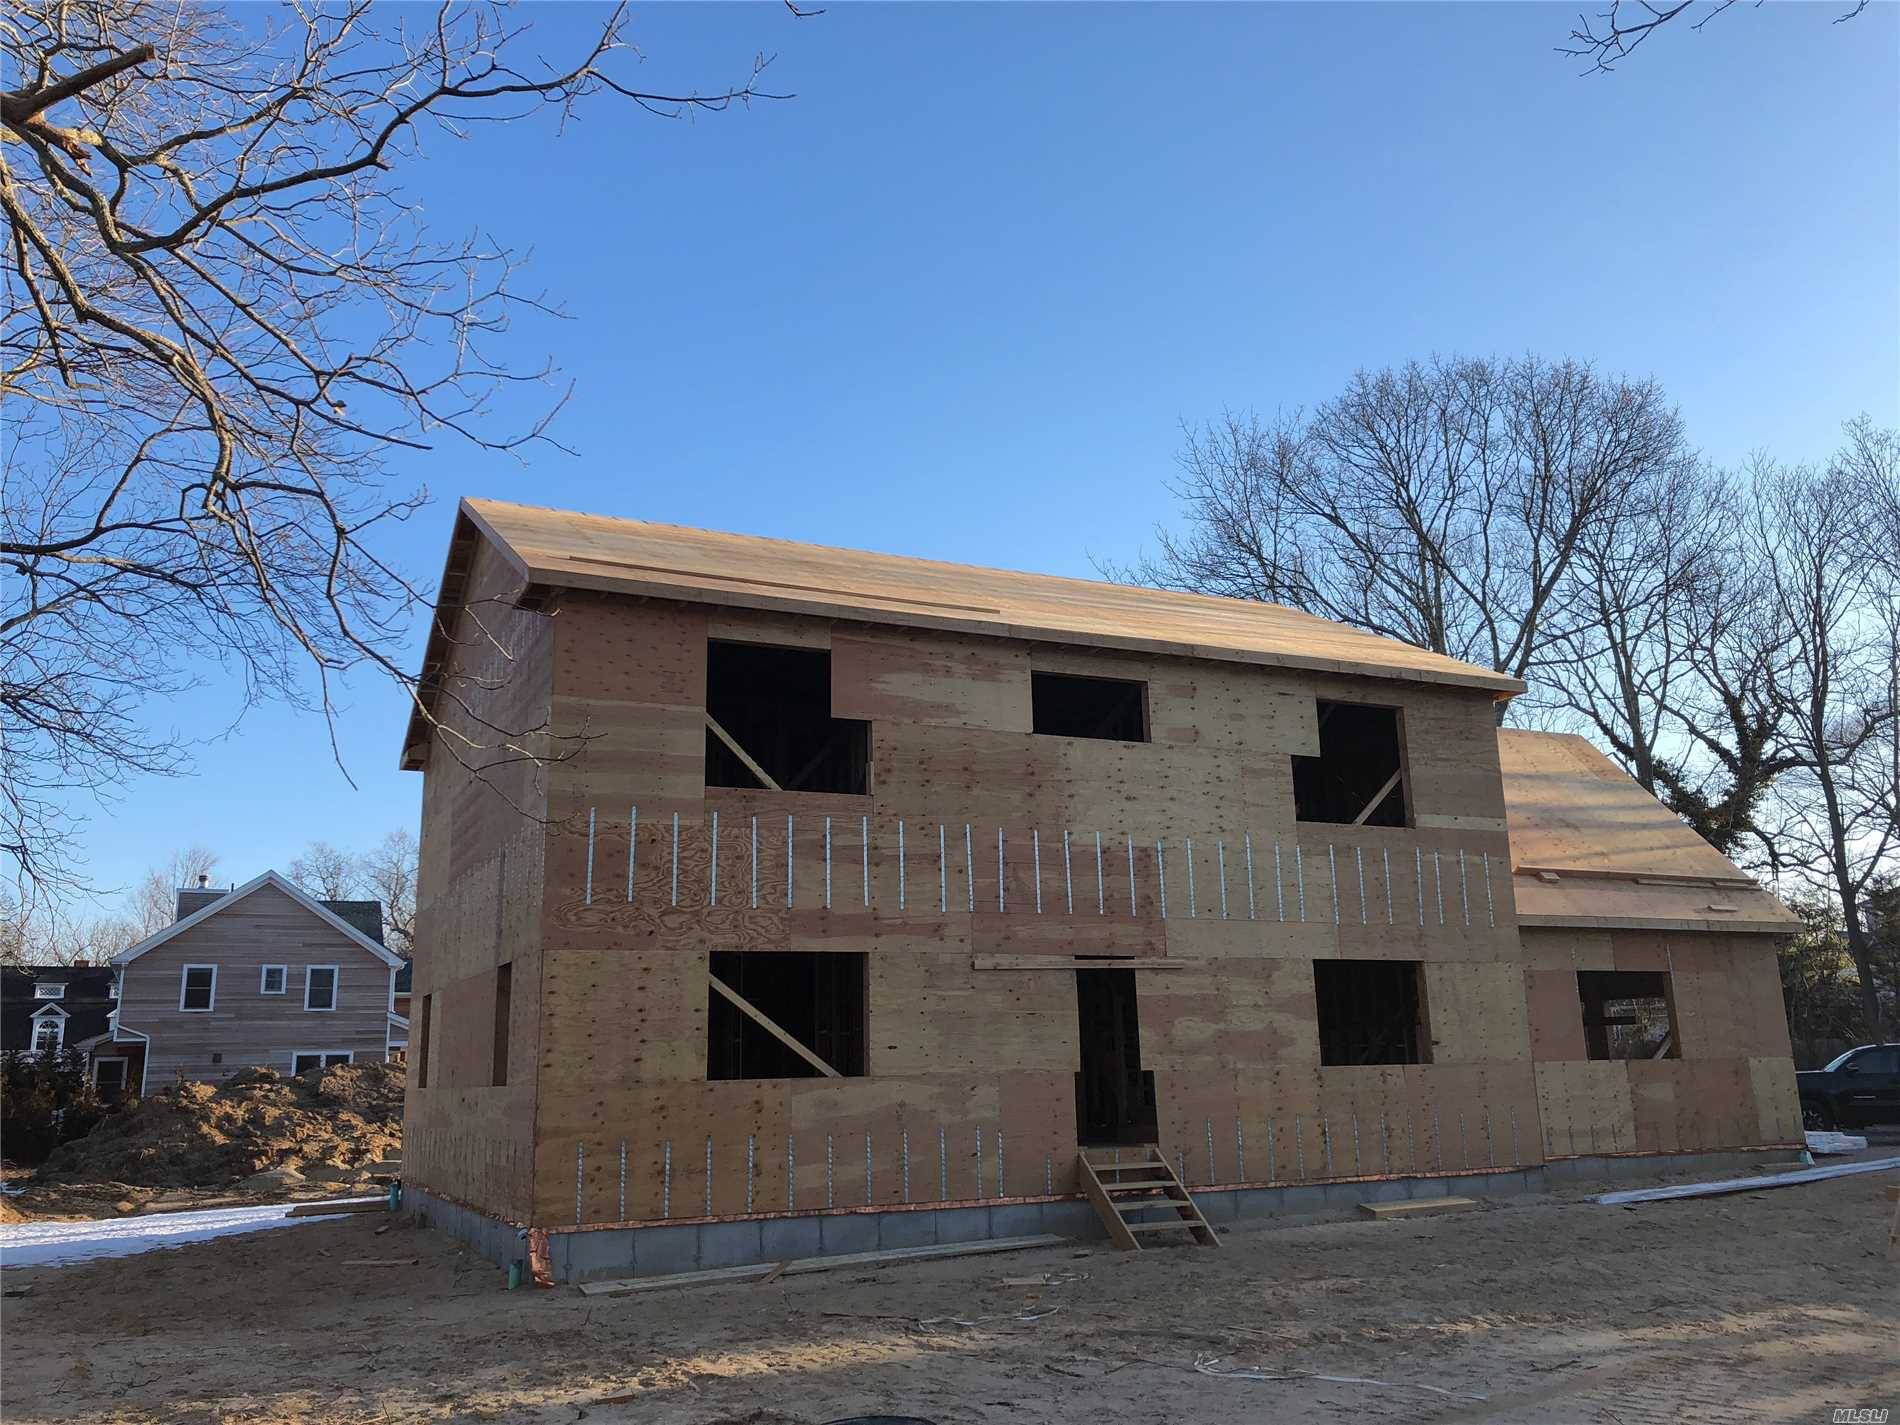 This New Post Modern Four Bedroom And Three And One Half Bath Home Is Under Construction And Will Be Completed Soon.